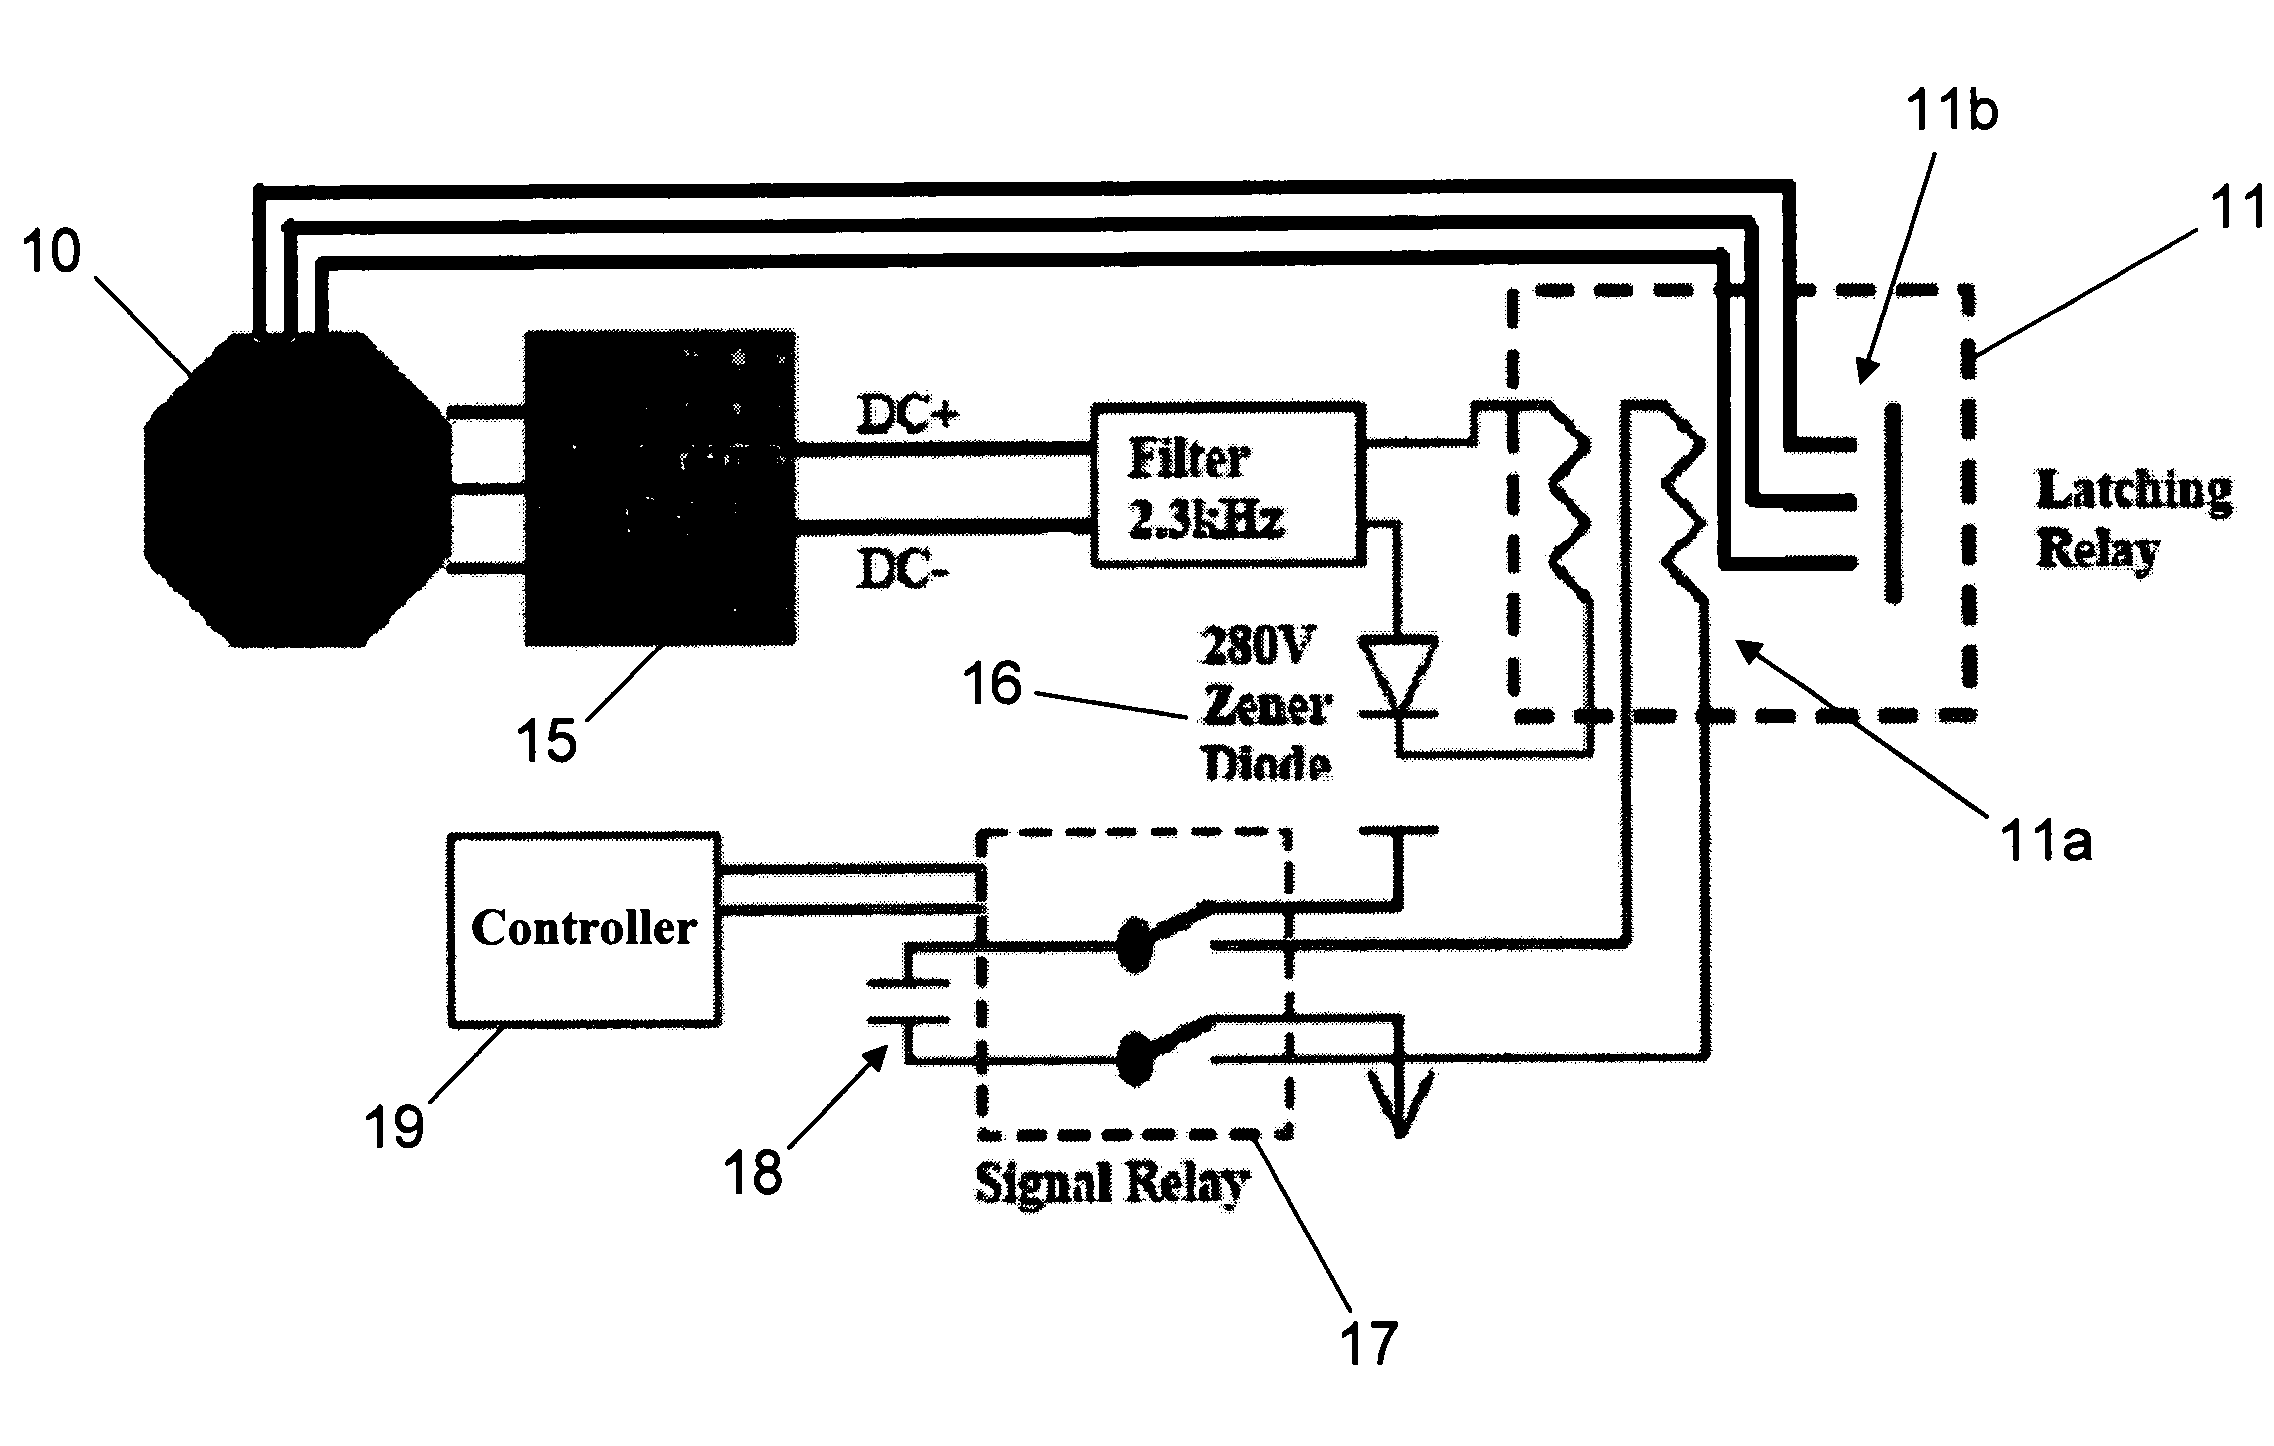 Stall controller and triggering condition control features for a wind turbine